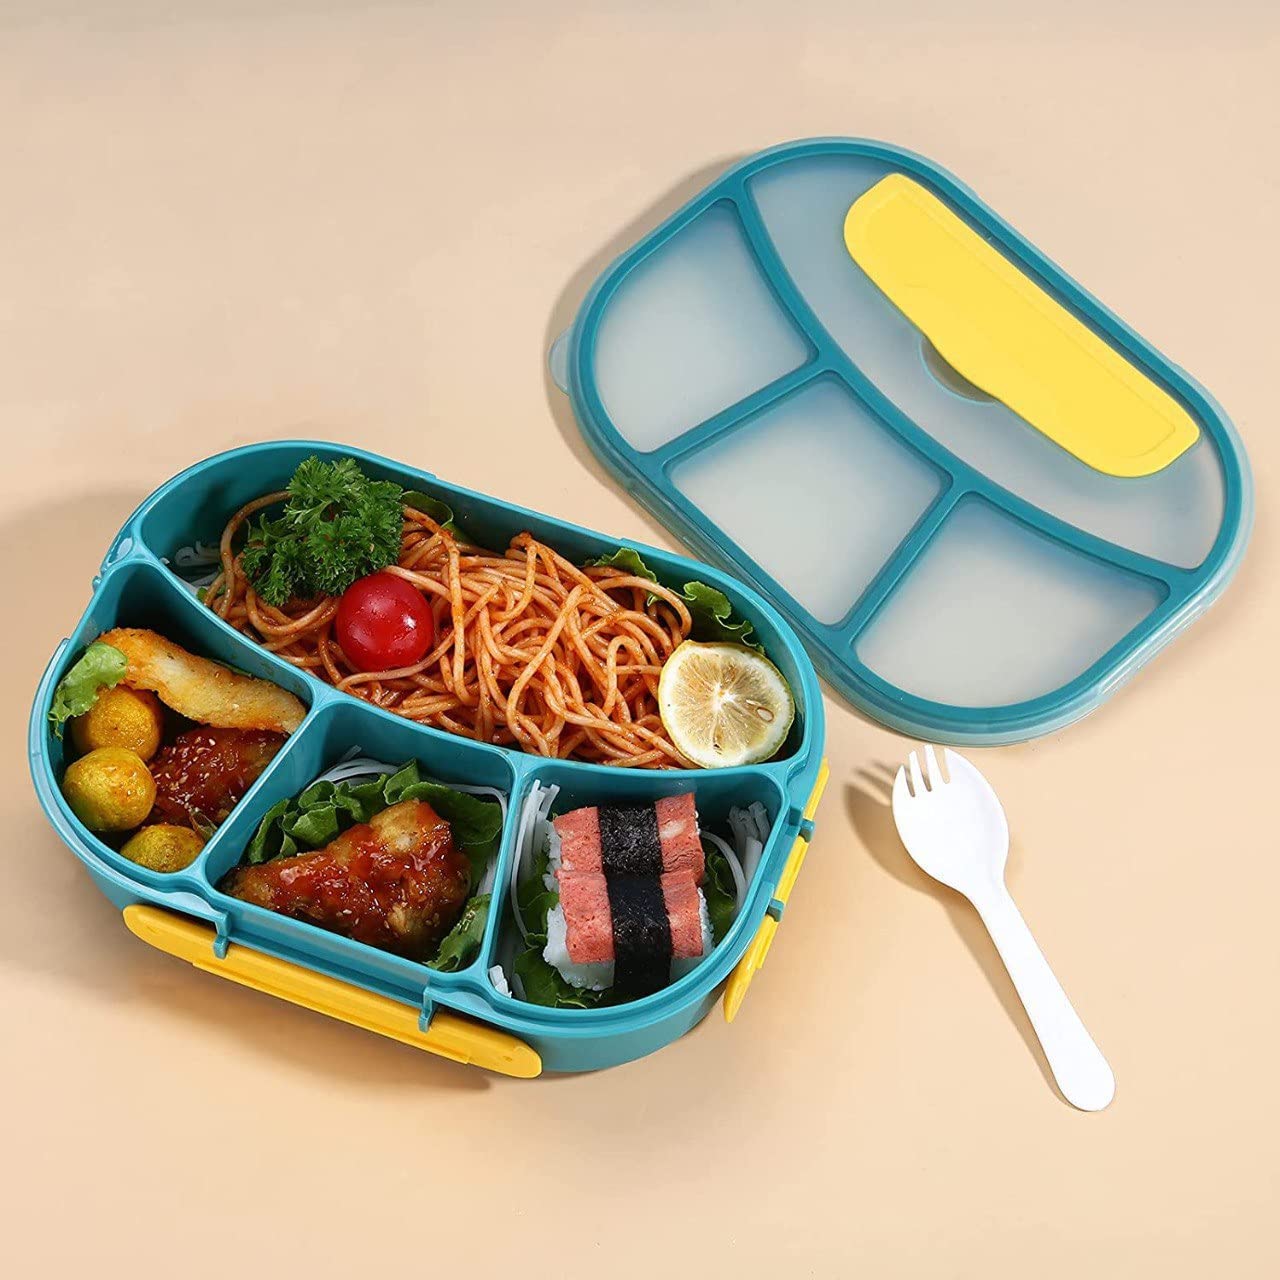 MONGSEW 4pcs Bento Snack Boxes, Snack Containers for Toddlers & Adults, Reusable 4 Compartment Food Snack Containers for Work, School, Travel, Picnics